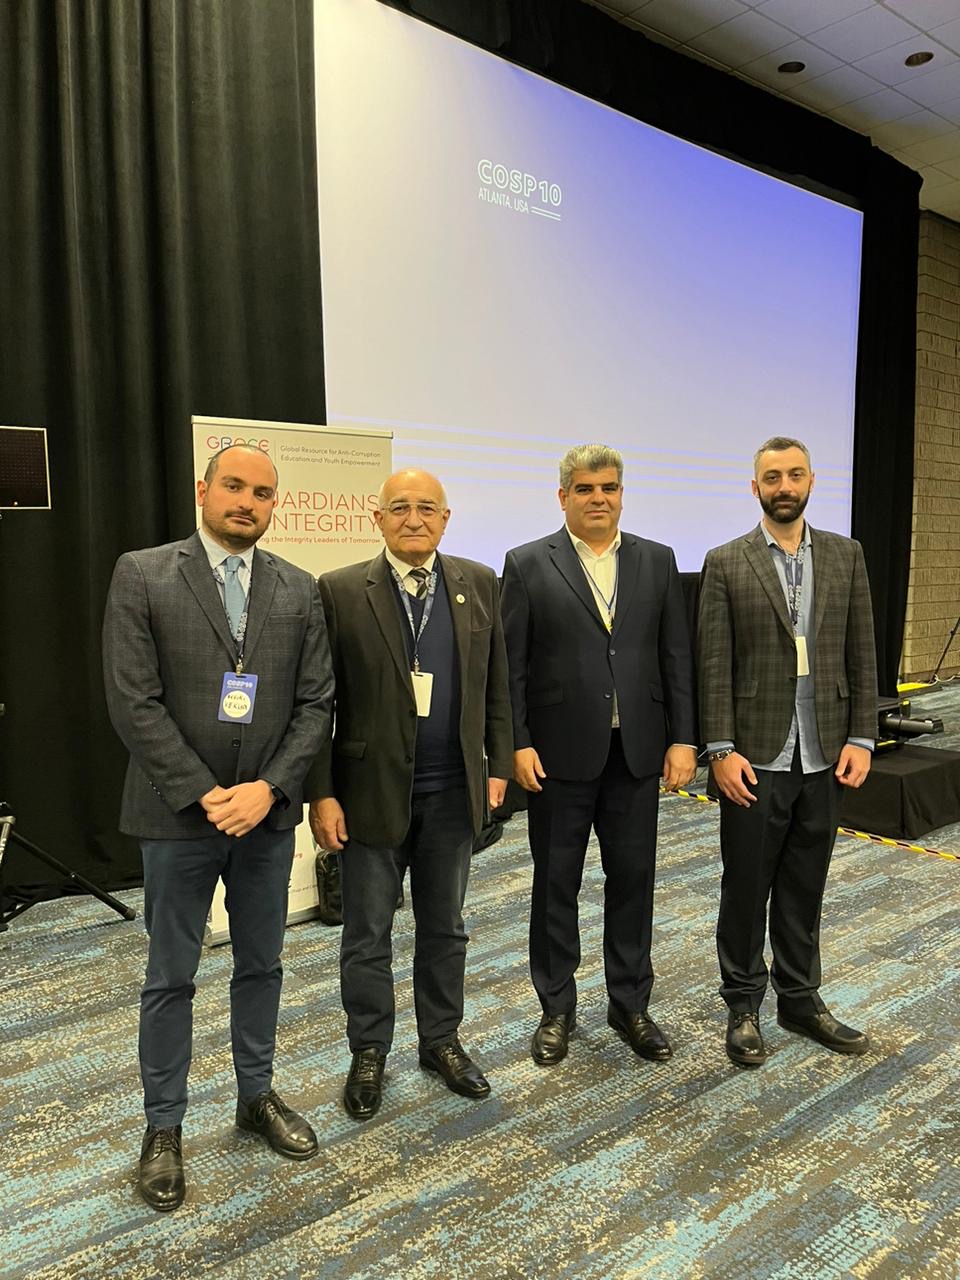 Representatives from the Anti-Corruption Bureau are participating in the 10th session of the Conference of States Parties to the United Nations Convention Against Corruption (UNCAC COSP), taking place in Atlanta, United States of America